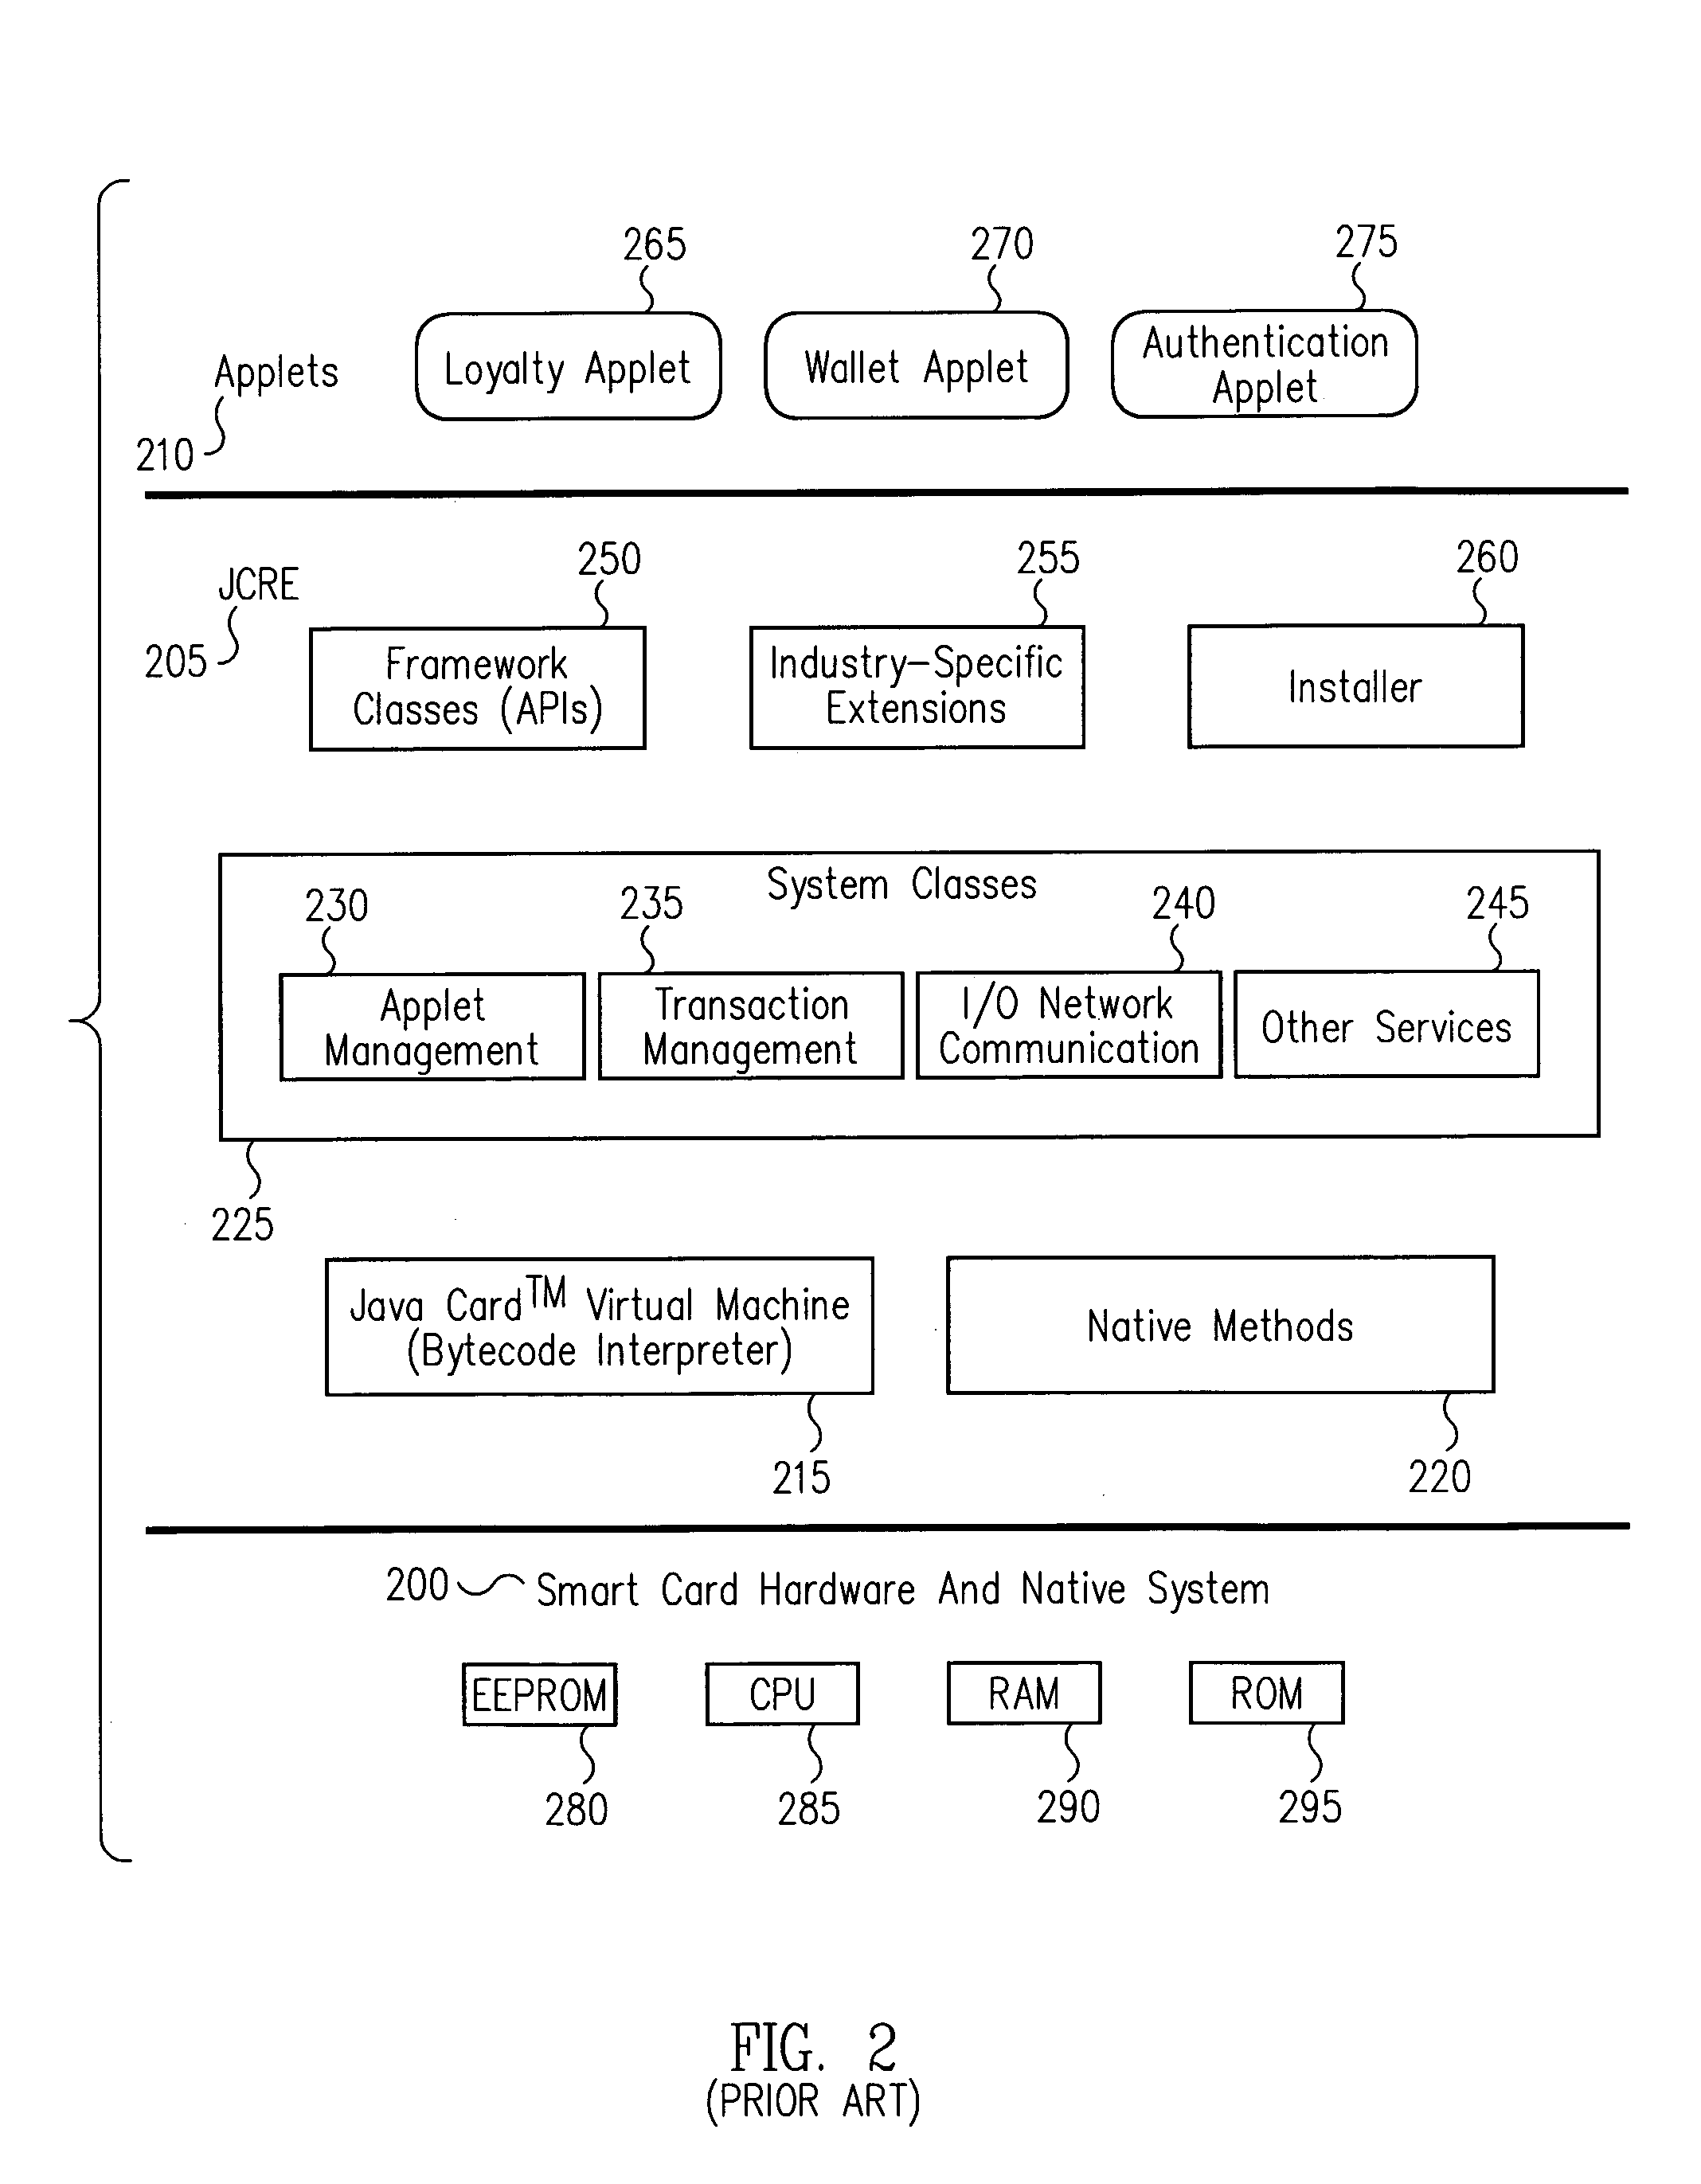 Method and apparatus for deployment of high integrity software using initialization order and calling order constraints